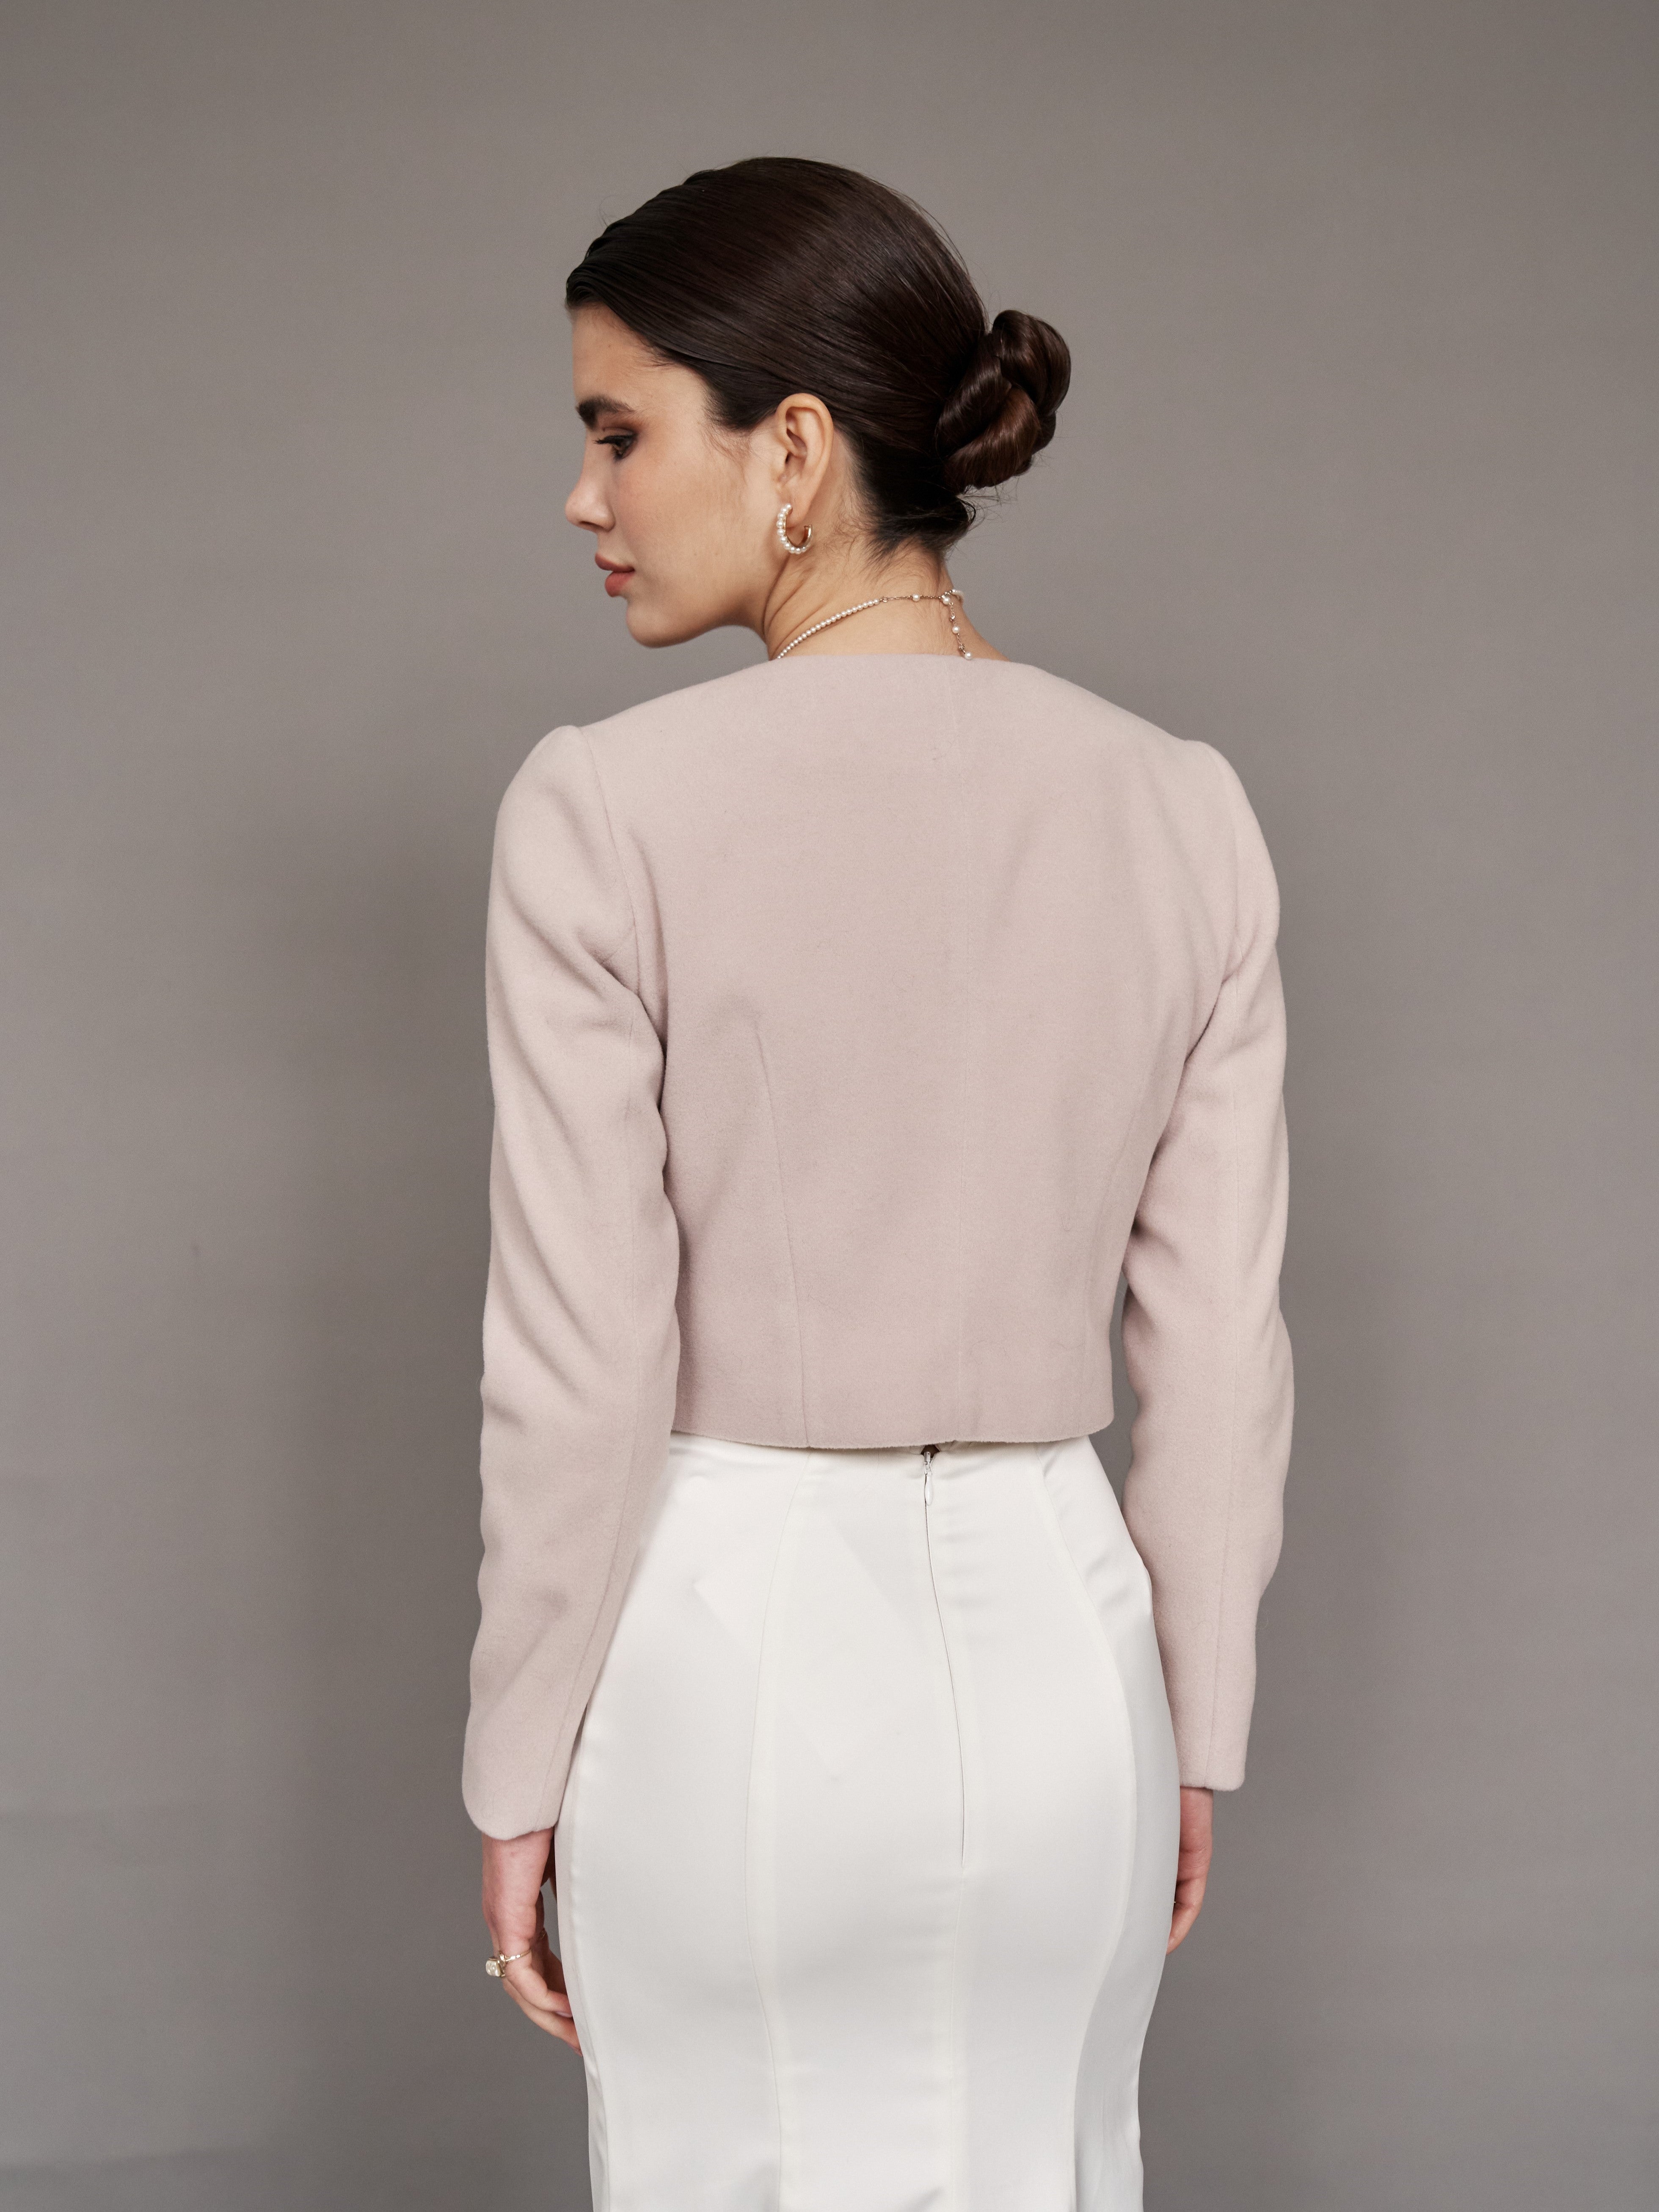 Blush bridal jacket with pearl buttons